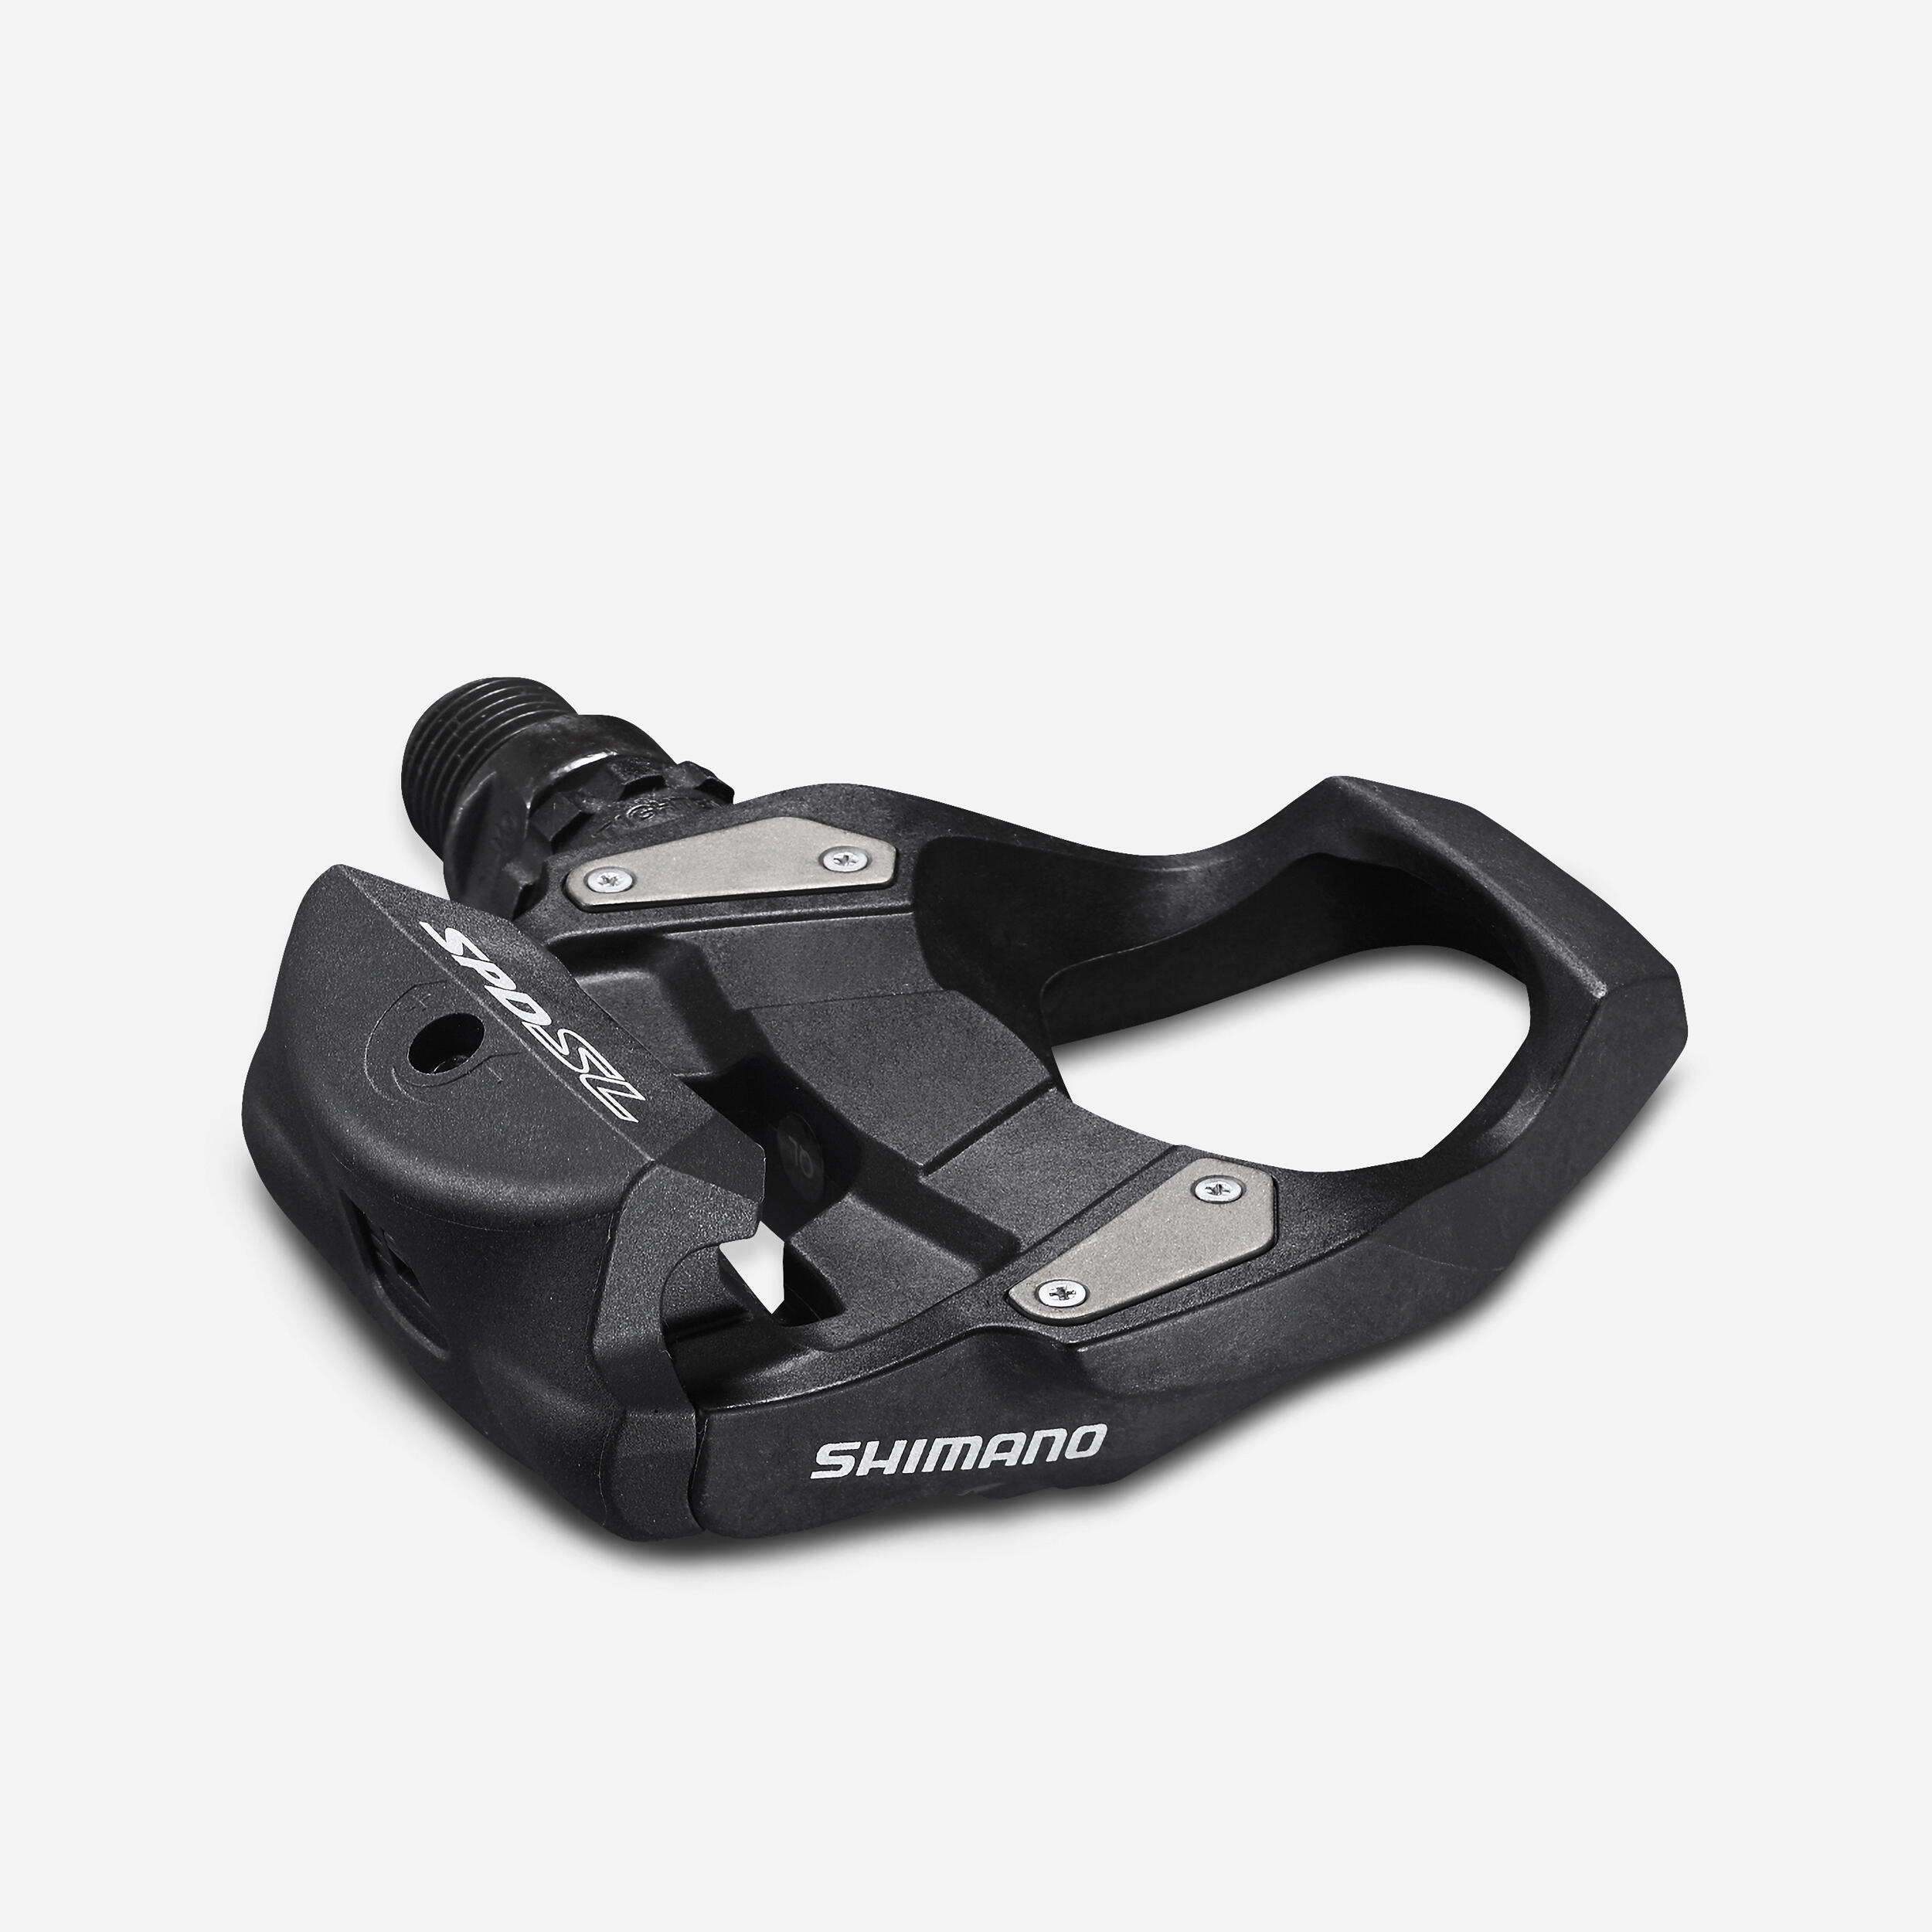 PEDALE SHIMANO RS 500